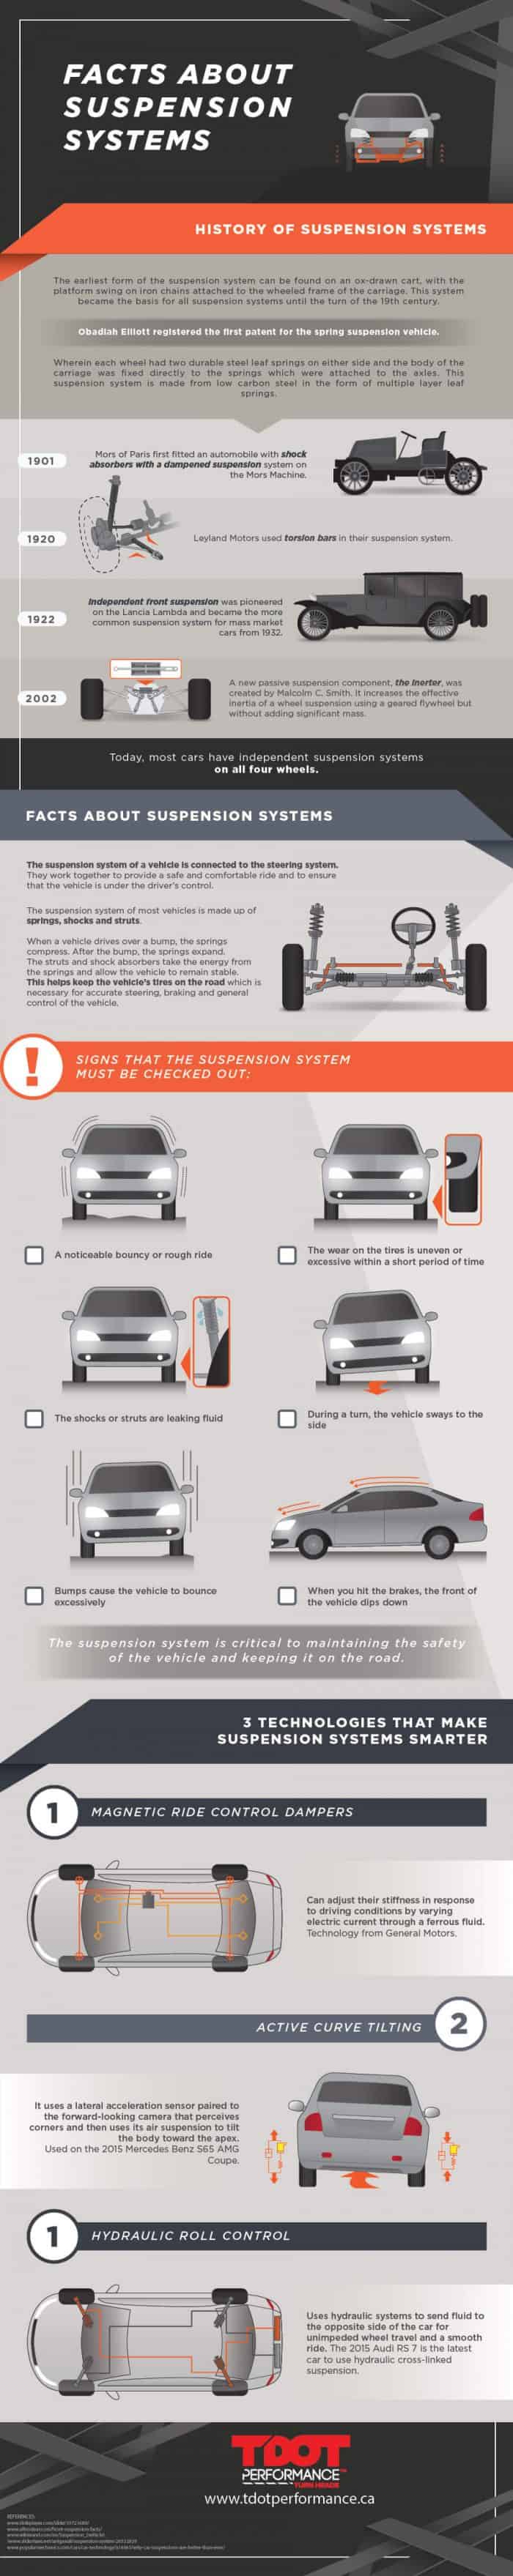 infographic about car suspension systems and why regular maintenance is important